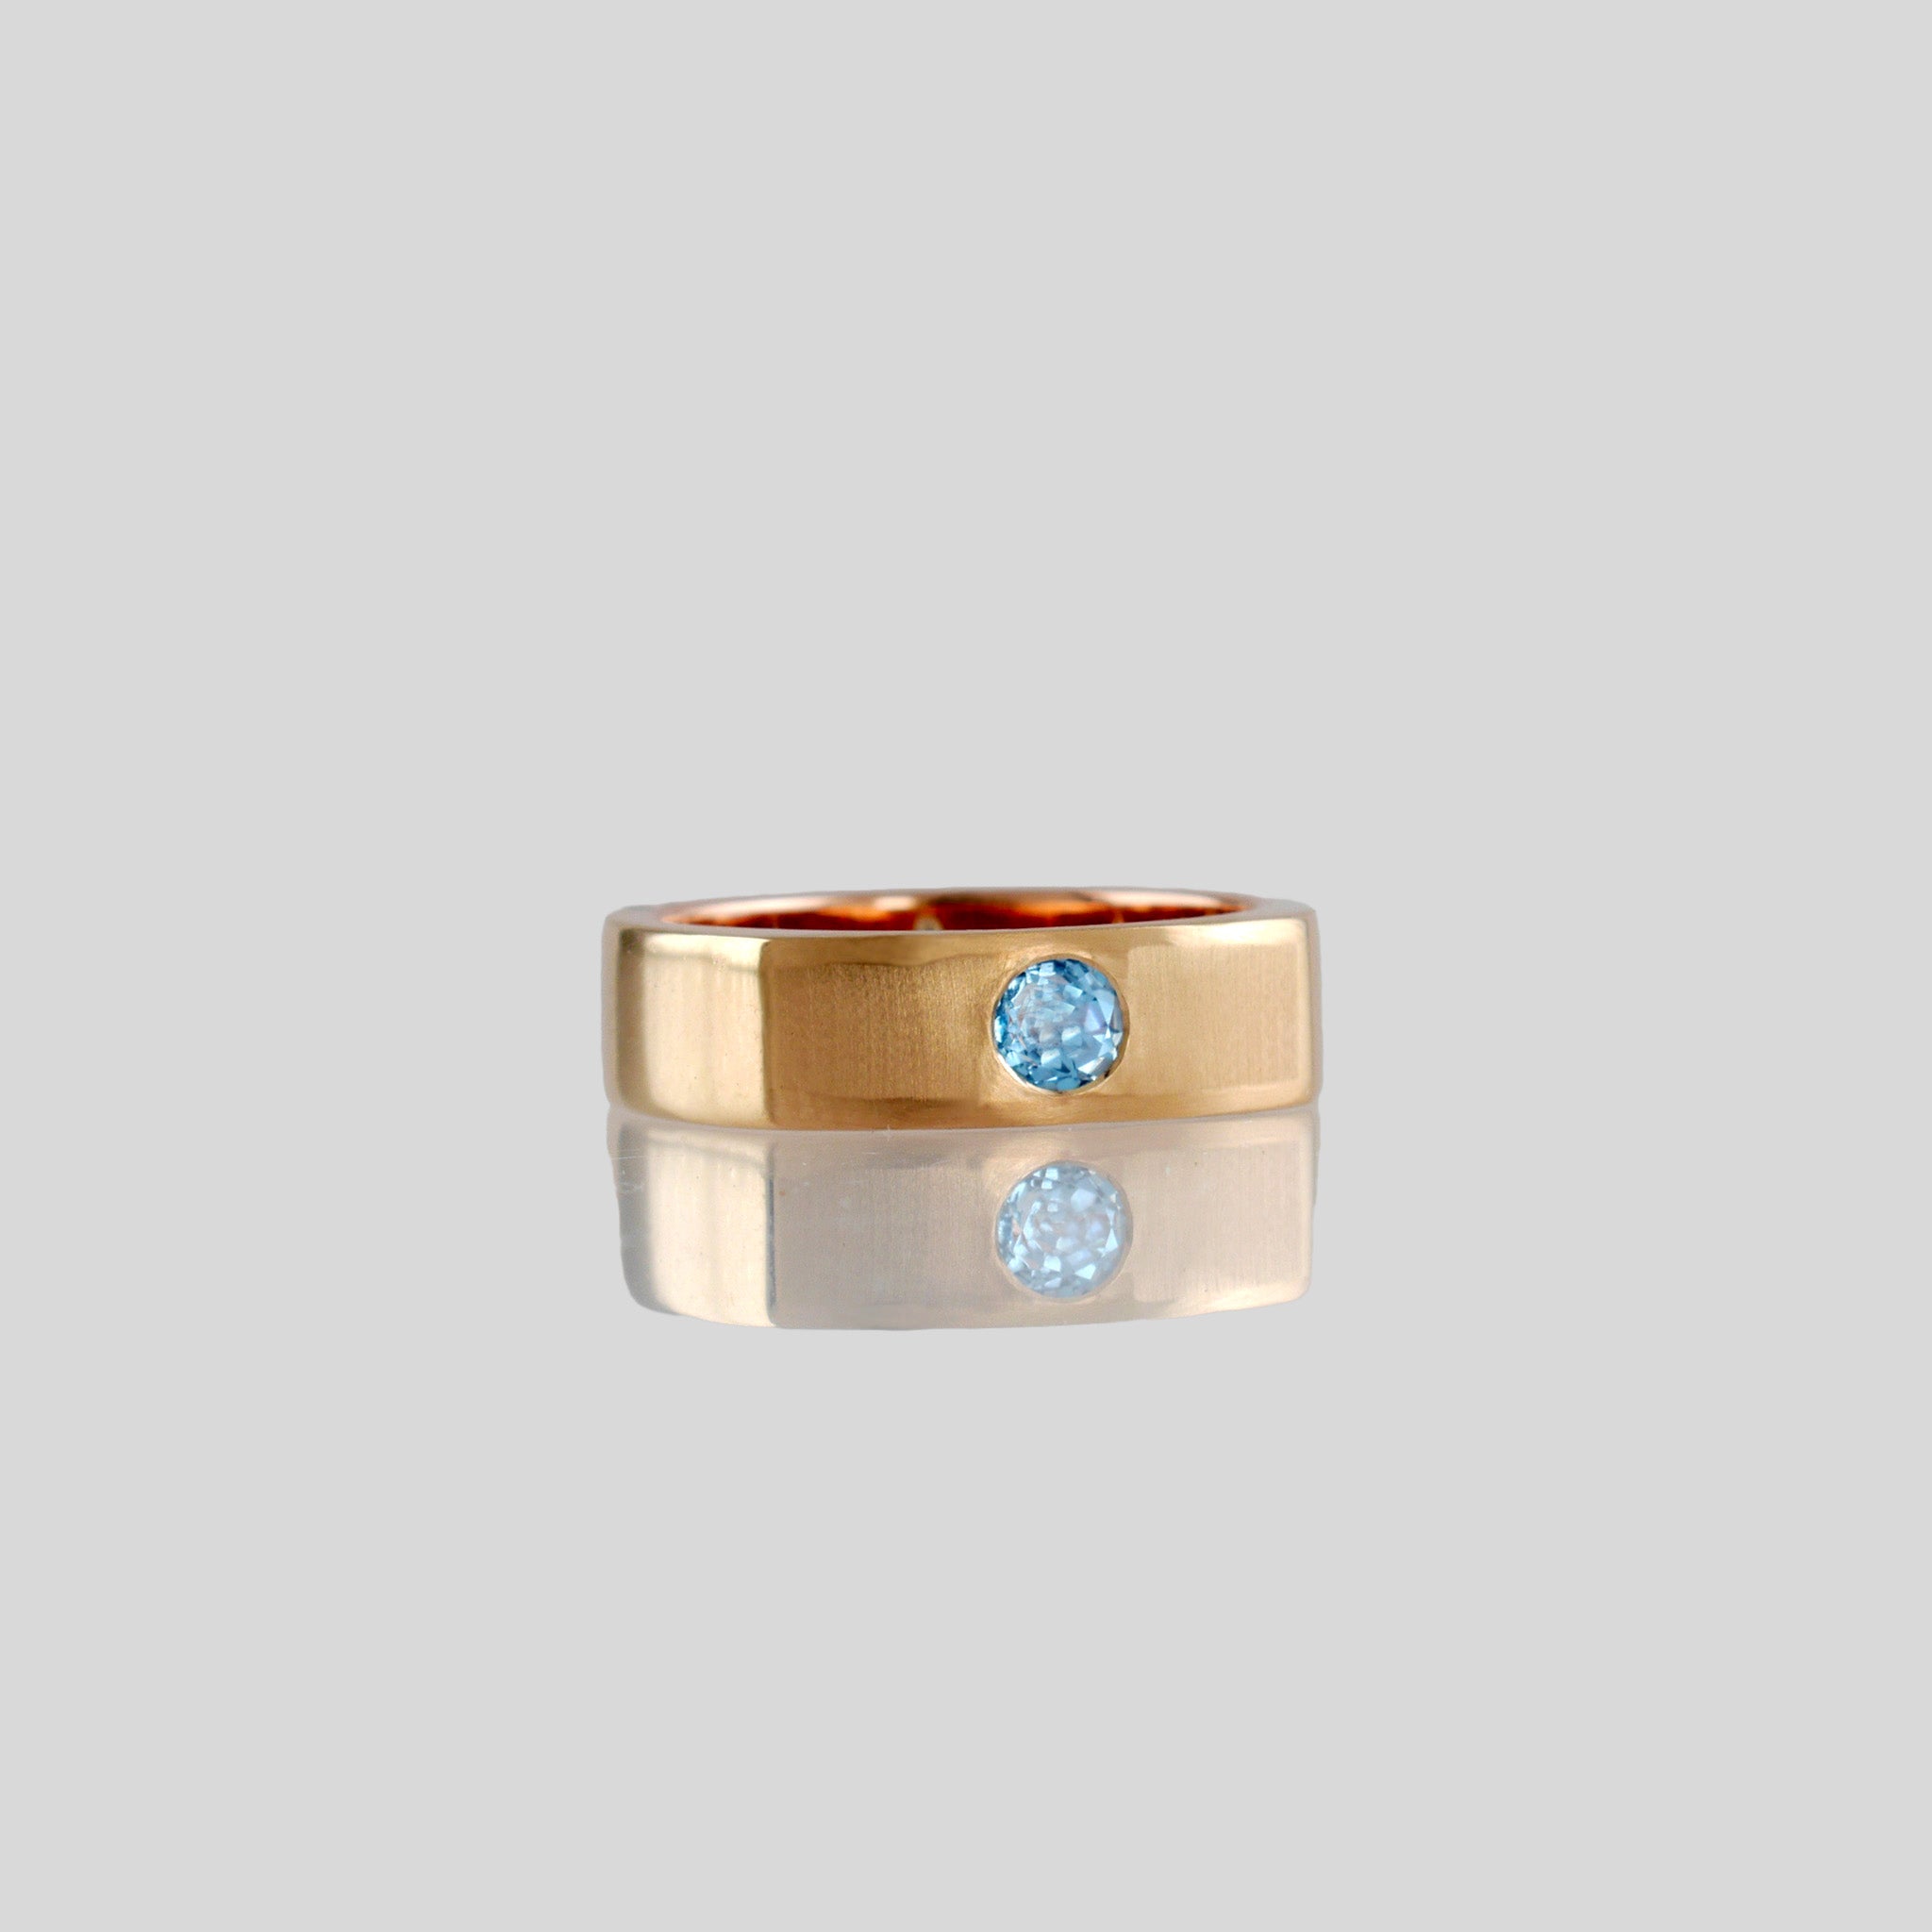 front view a Square Ring with rounded edges, symbolizing 'rounding the square,' crafted from 18k Rose Gold and adorned with Blue Topaz. A metaphor for overcoming challenges with grace and elegance.